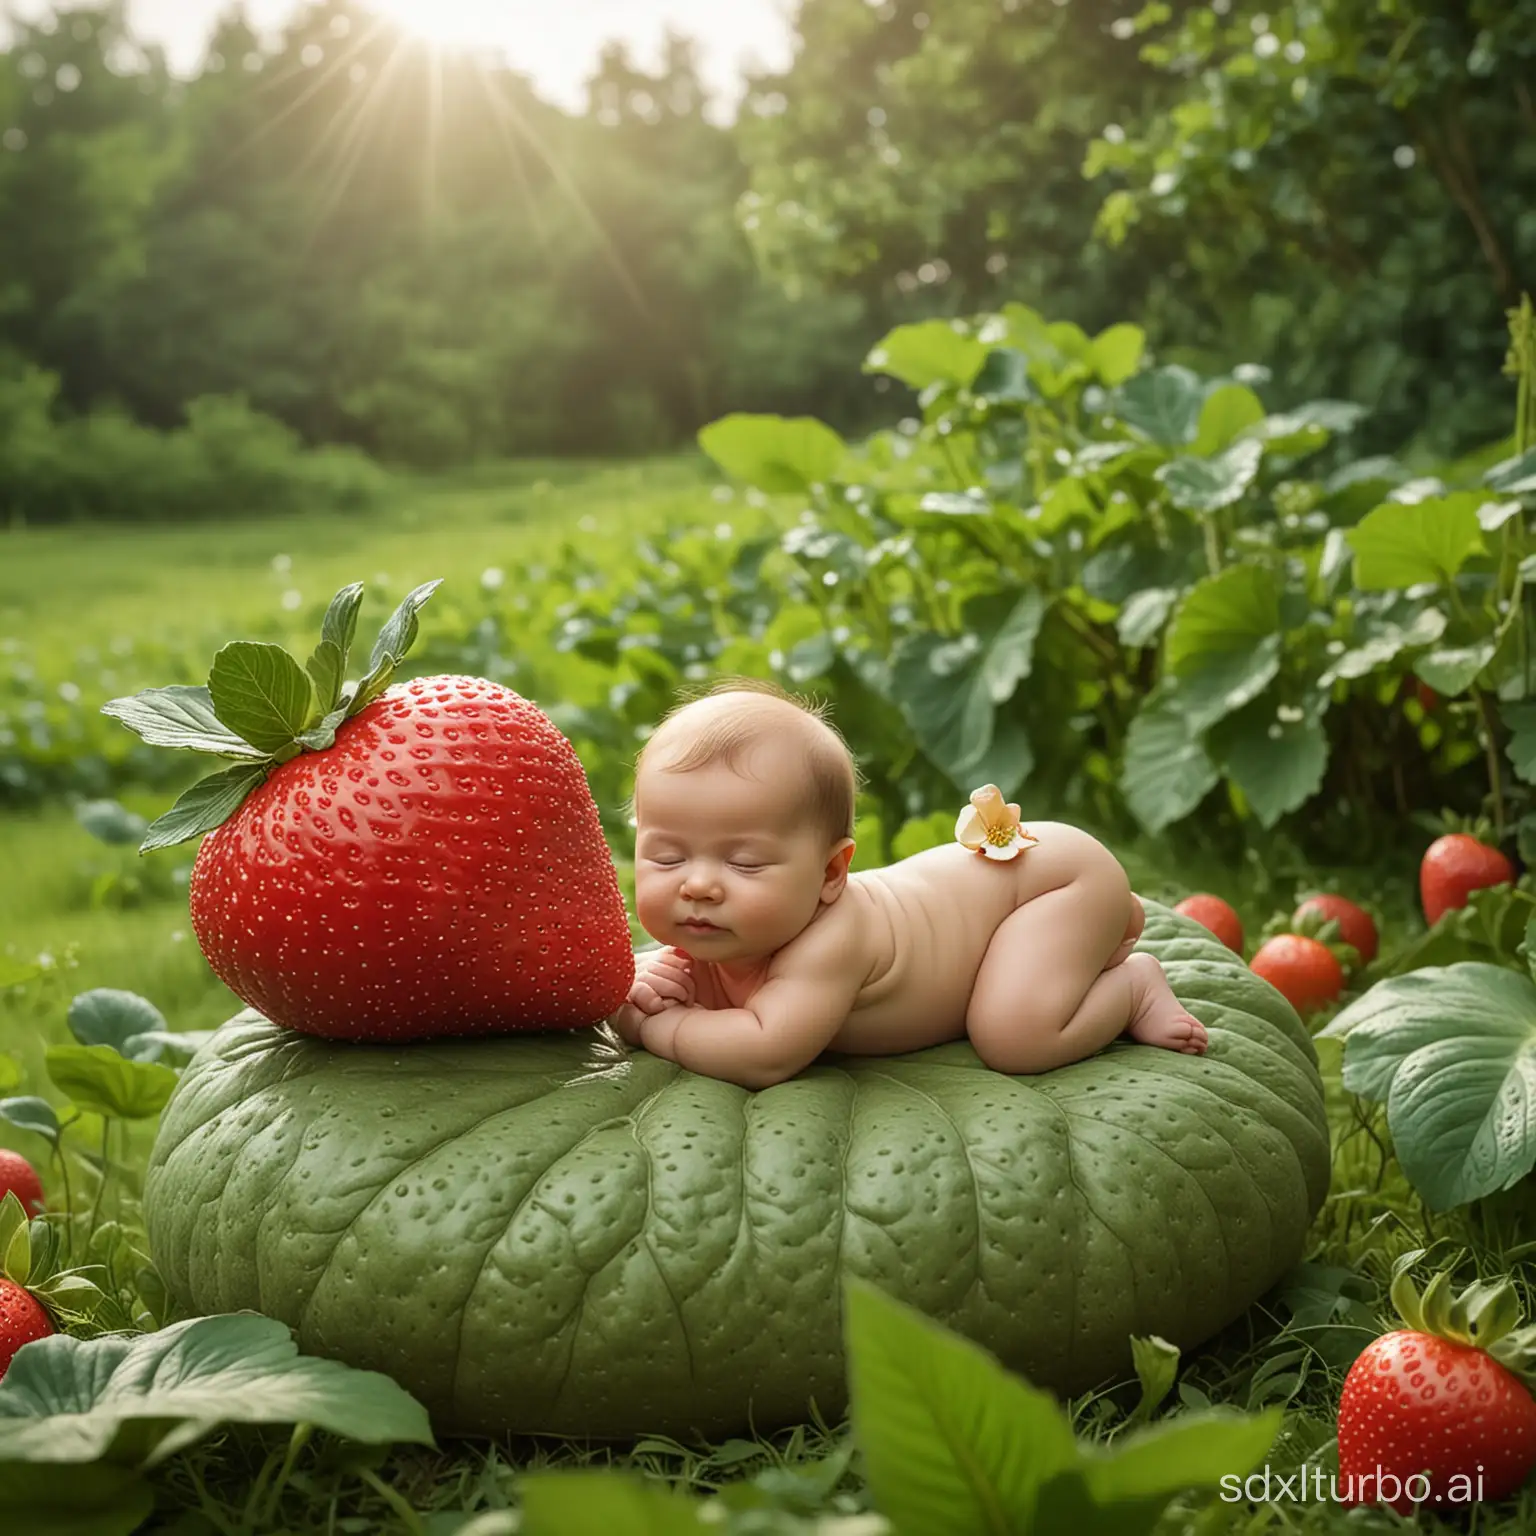 Peaceful baby lying on a giant strawberry, with a gentle hand holding the sculpture, set against a blurred green meadow background, featuring a strawberry umbrella made of a large leaf, creating a warm and romantic atmosphere.